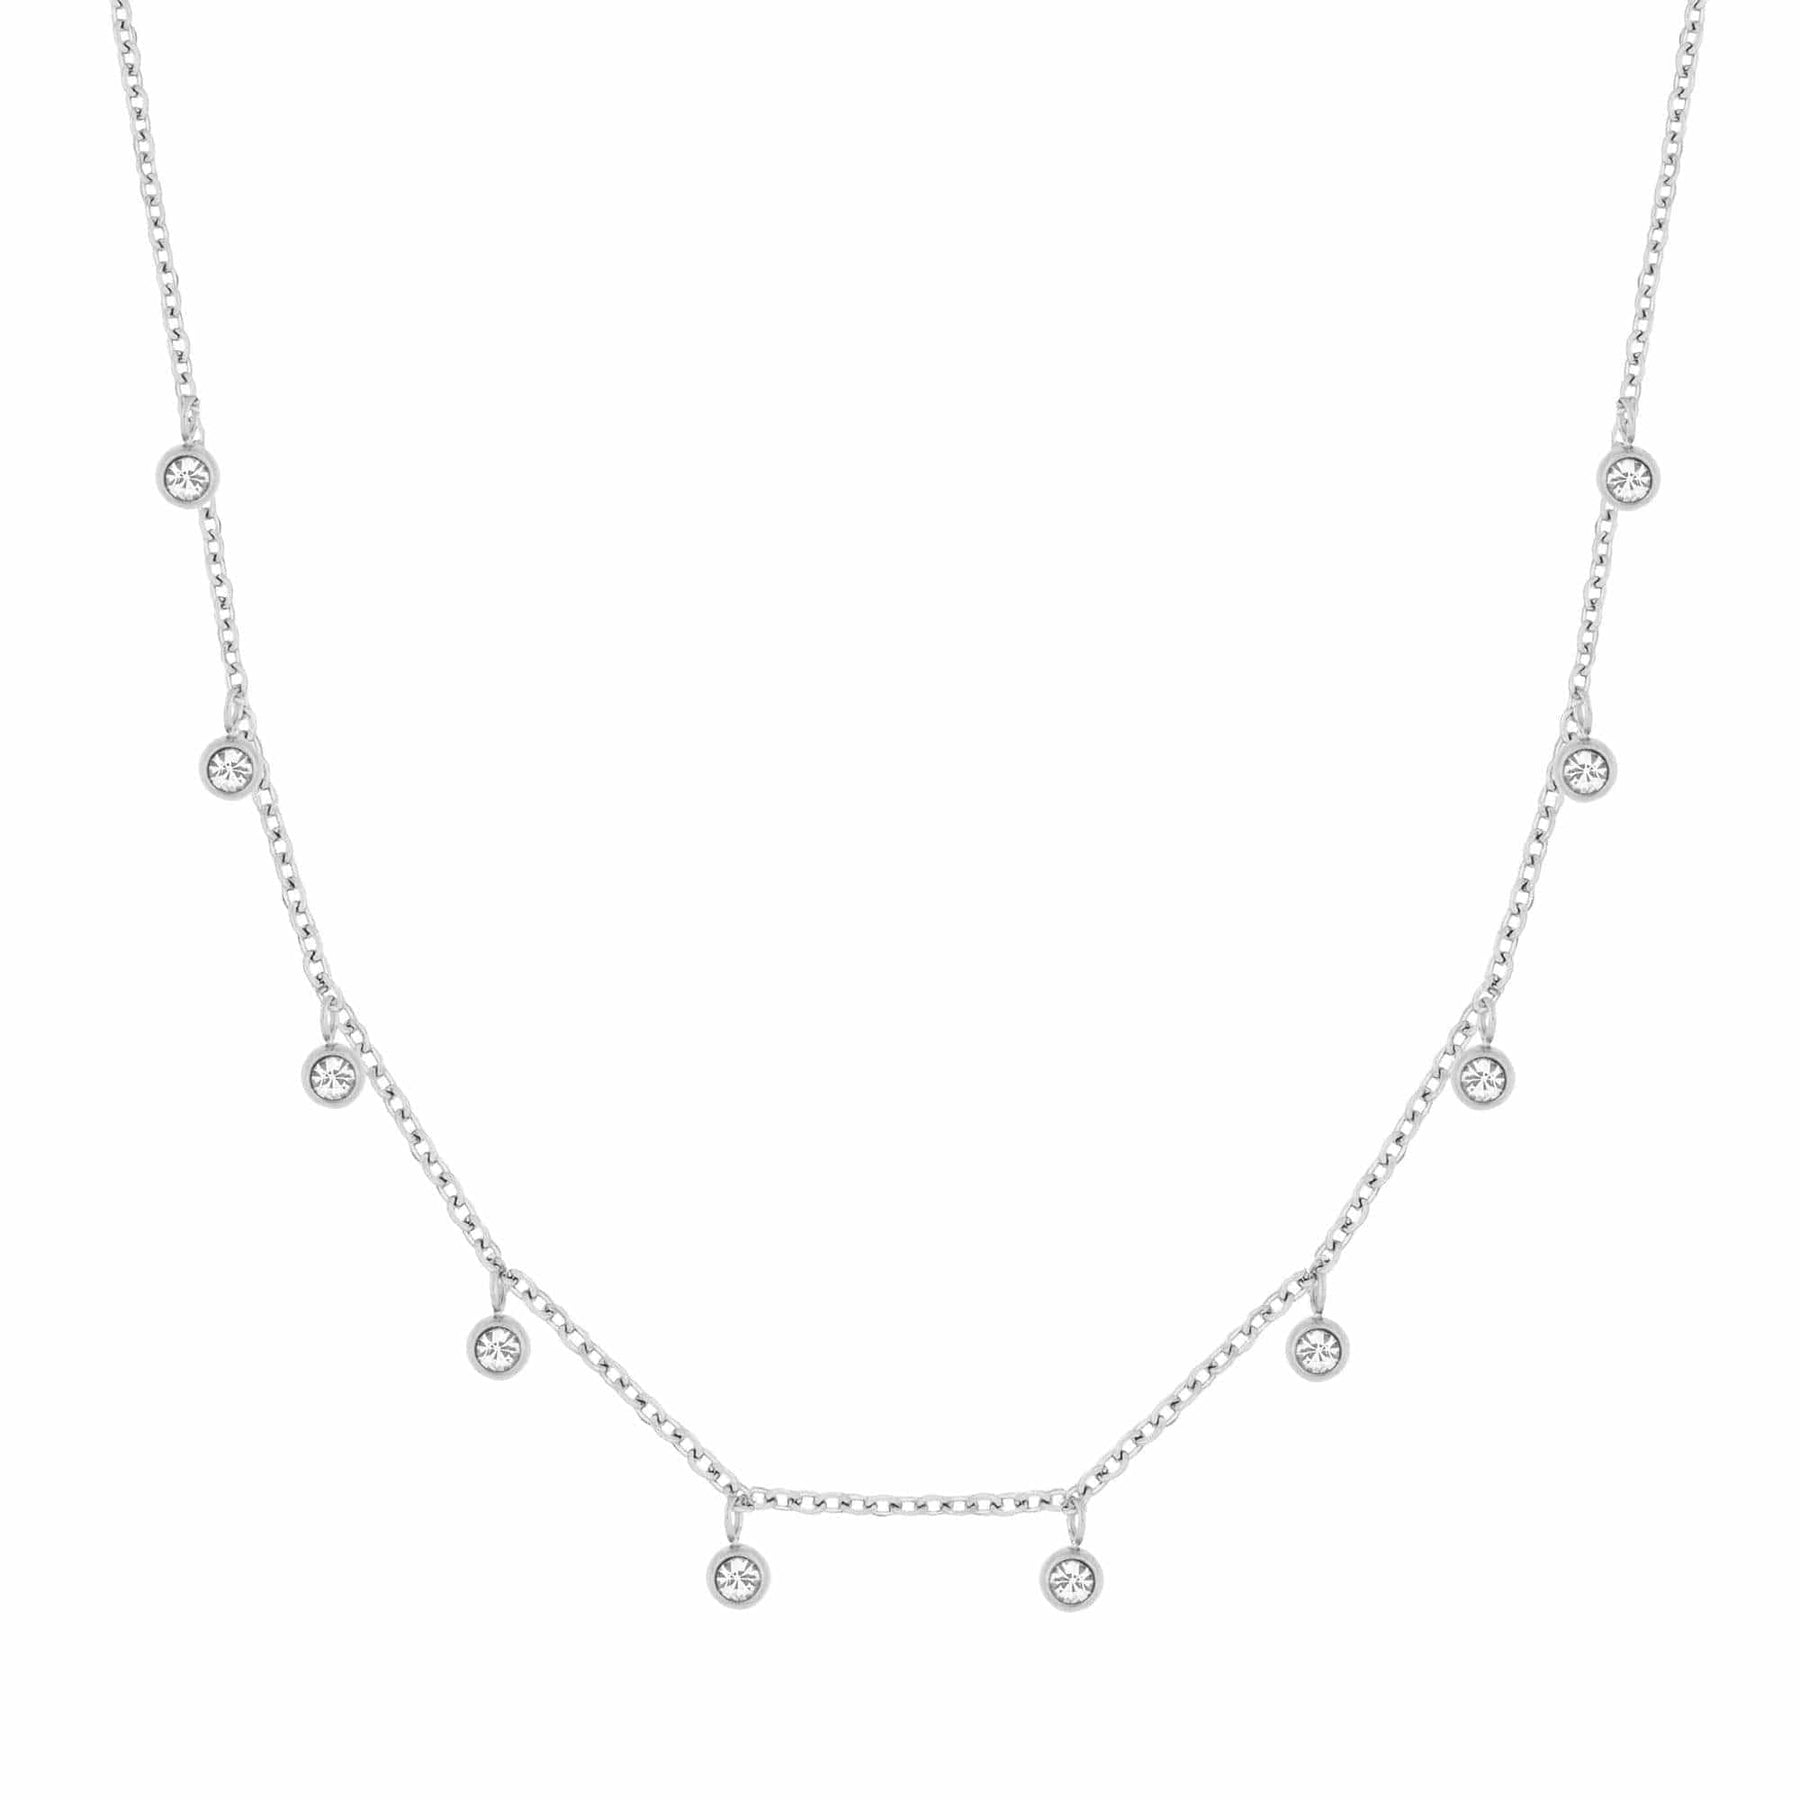 BohoMoon Stainless Steel Gabrielle Necklace Silver